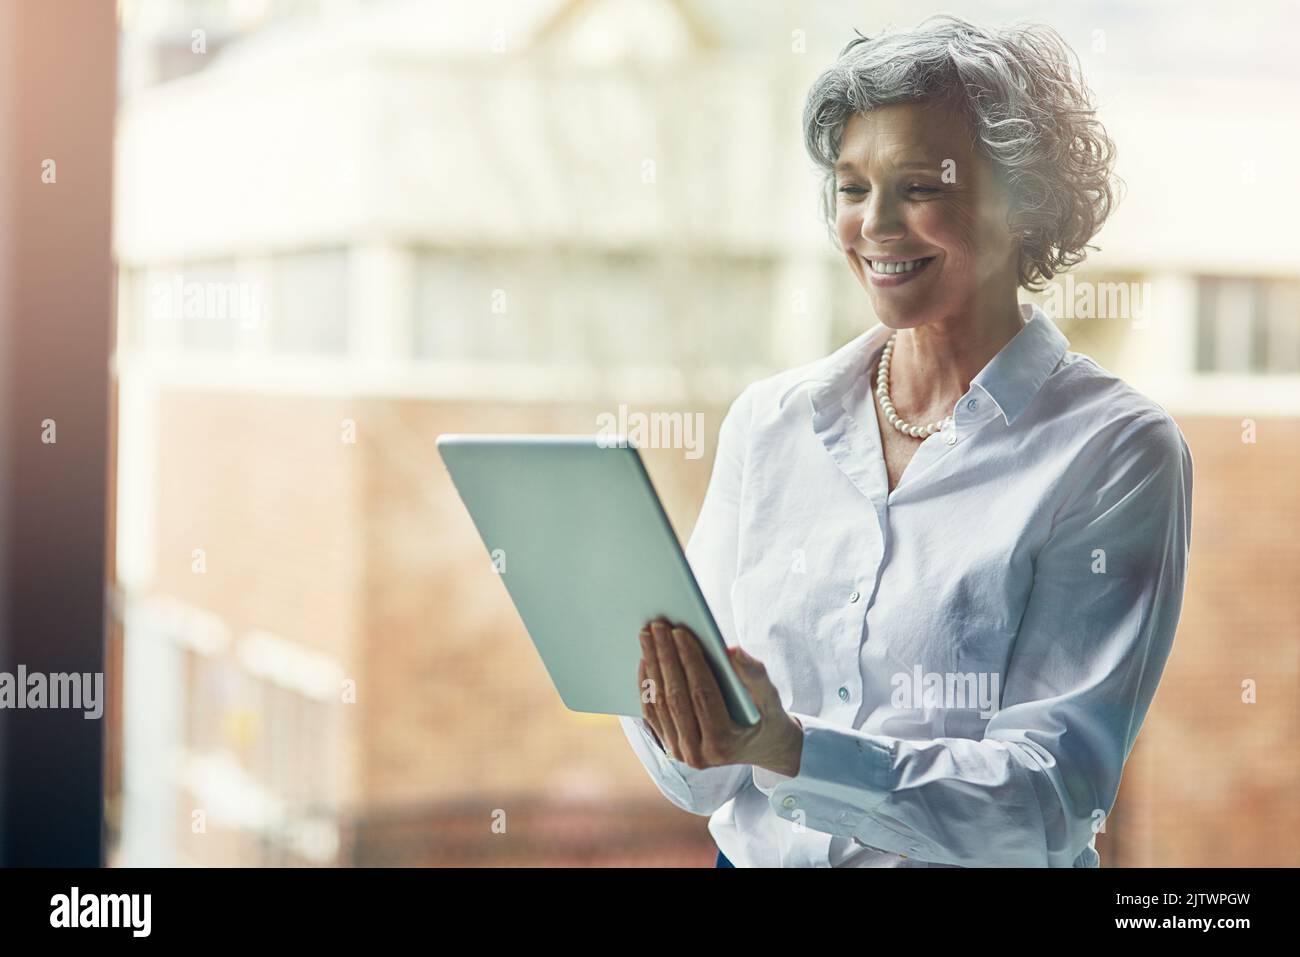 Advancing her way through business with technology. a mature businesswoman working on a digital tablet. Stock Photo